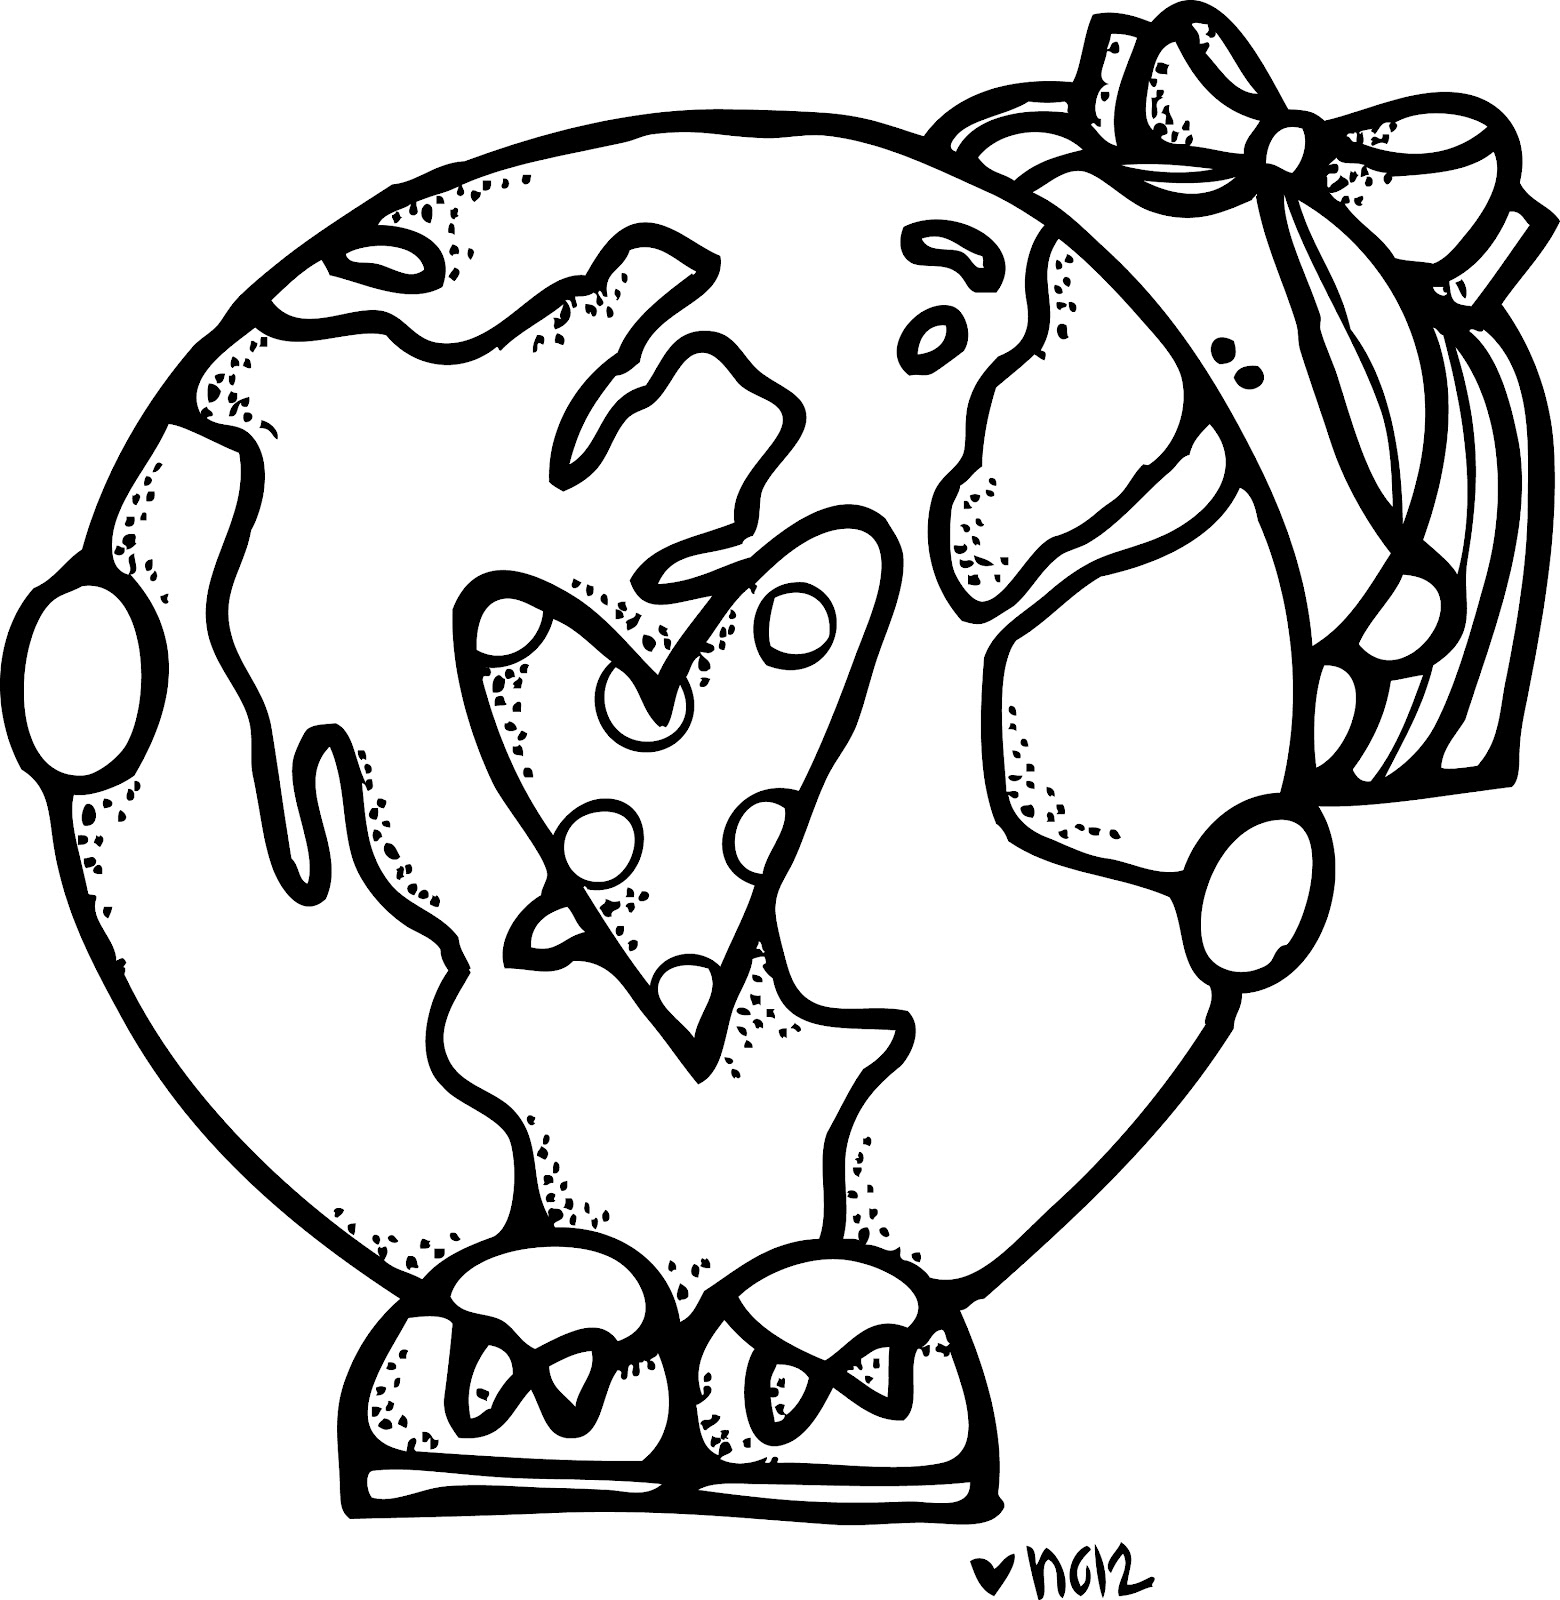 April earth day clipart black and white